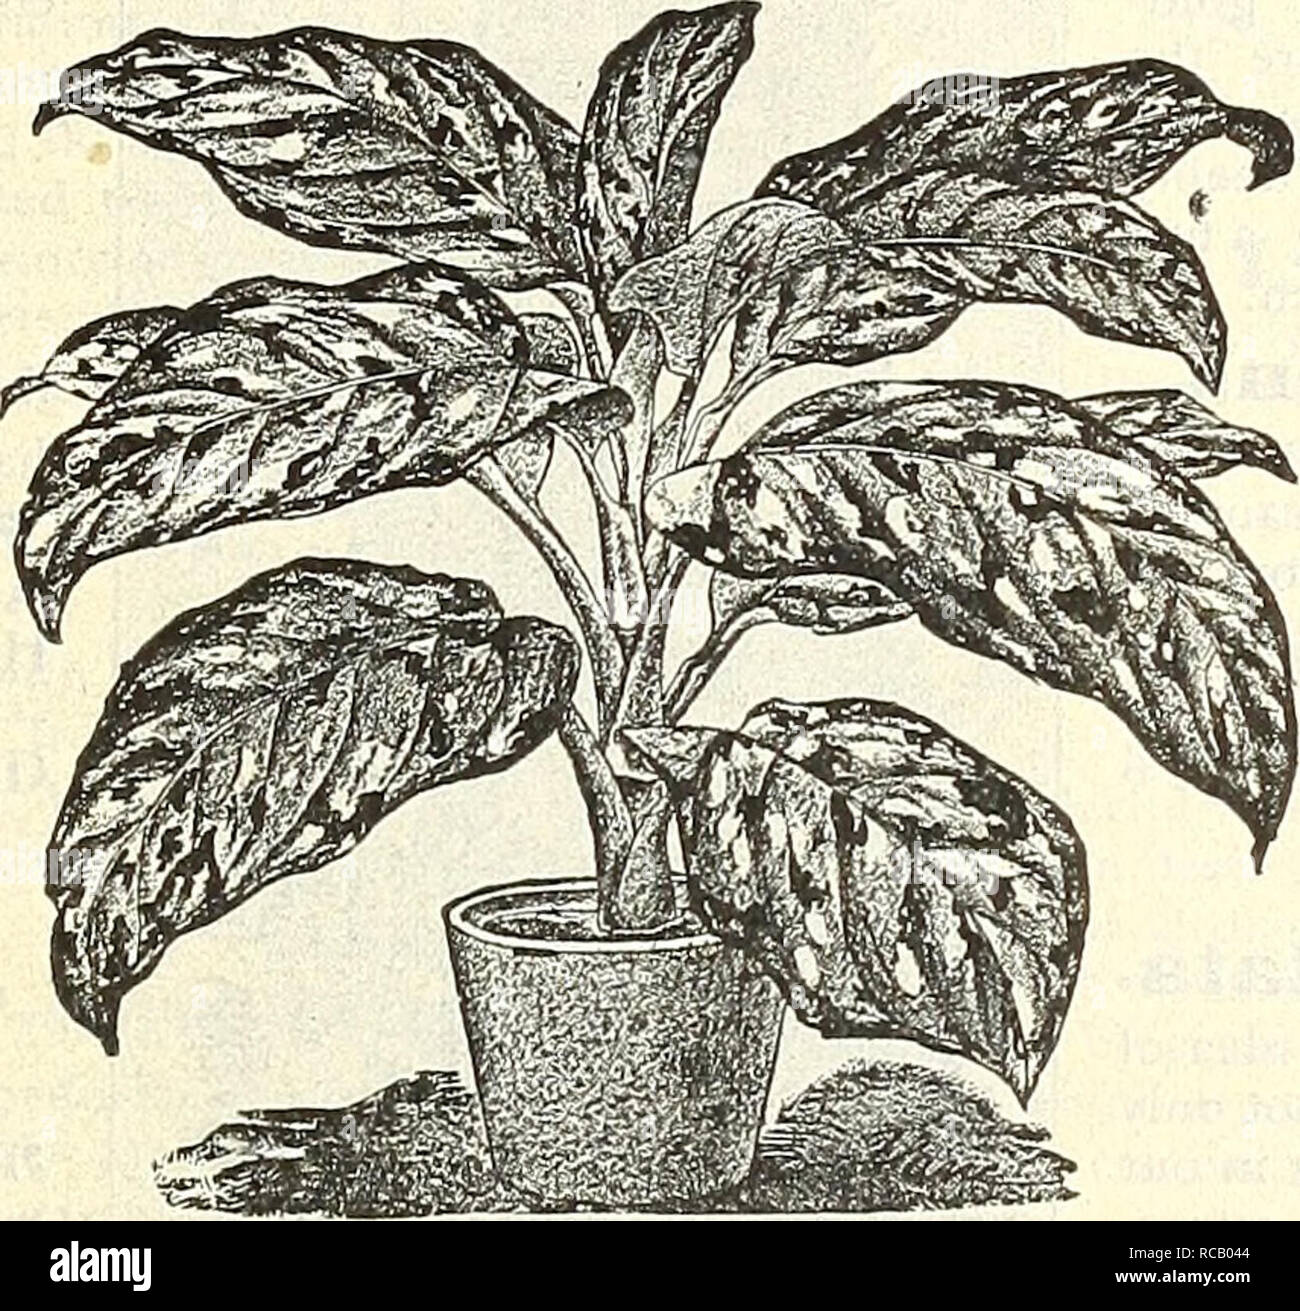 . Dreer's autumn 1903 catalogue. Bulbs (Plants) Catalogs; Flowers Seeds Catalogs; Gardening Equipment and supplies Catalogs; Nurseries (Horticulture) Catalogs; Fruit Seeds Catalogs. Dreer»s Autumn Catalogue, i903« 31 CROTONS. Of this beautiful class of ornamental foliage plants we offer twelve of the finest varieties. 30 cts. to 50 cts. each ; |3,00 to §5.00 per doz. CYCAS REVOLUTA (SagoPalm). Valuable decorative plants both for lawn and house decora- tion ; their heavy, glossy, deep green fronds resist alike the gas, dust and cold to which decorative plants are frequently exposed. We grow an  Stock Photo